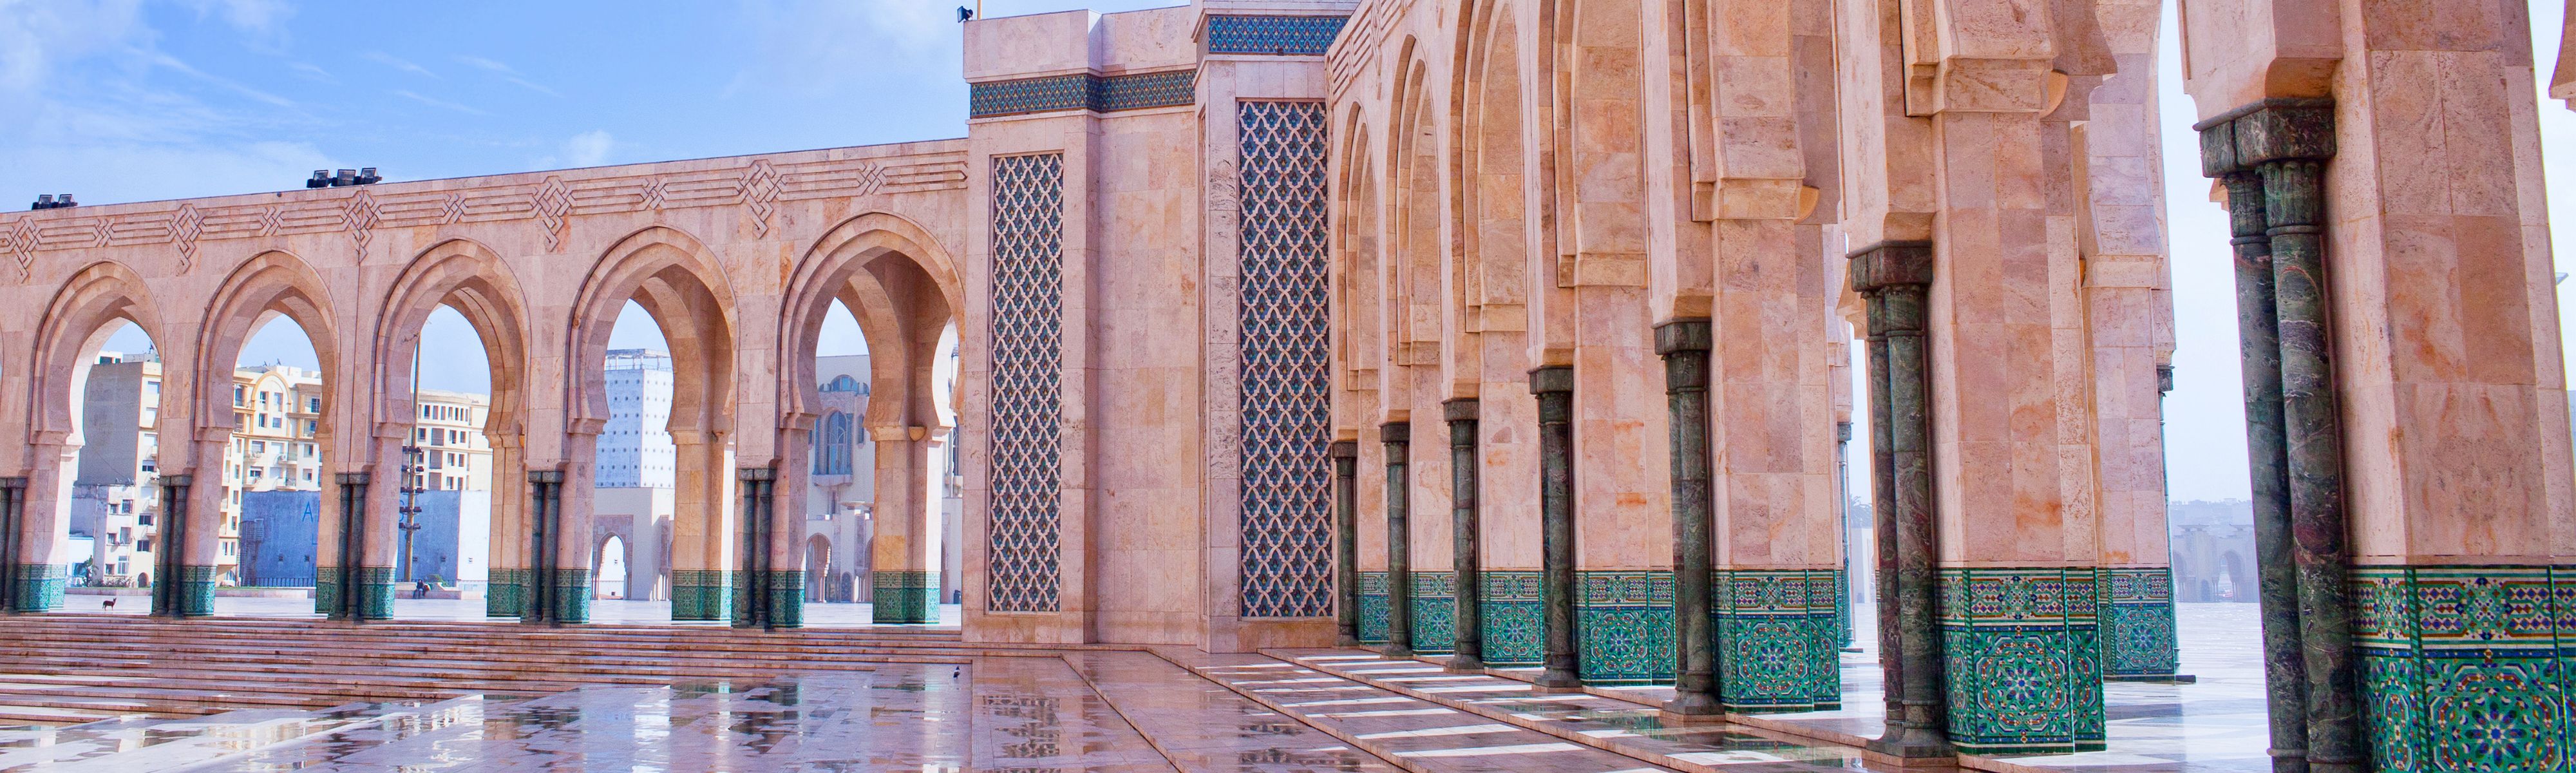 tiled pillars in the arcade gallery at the hassan II mosque in casablanca